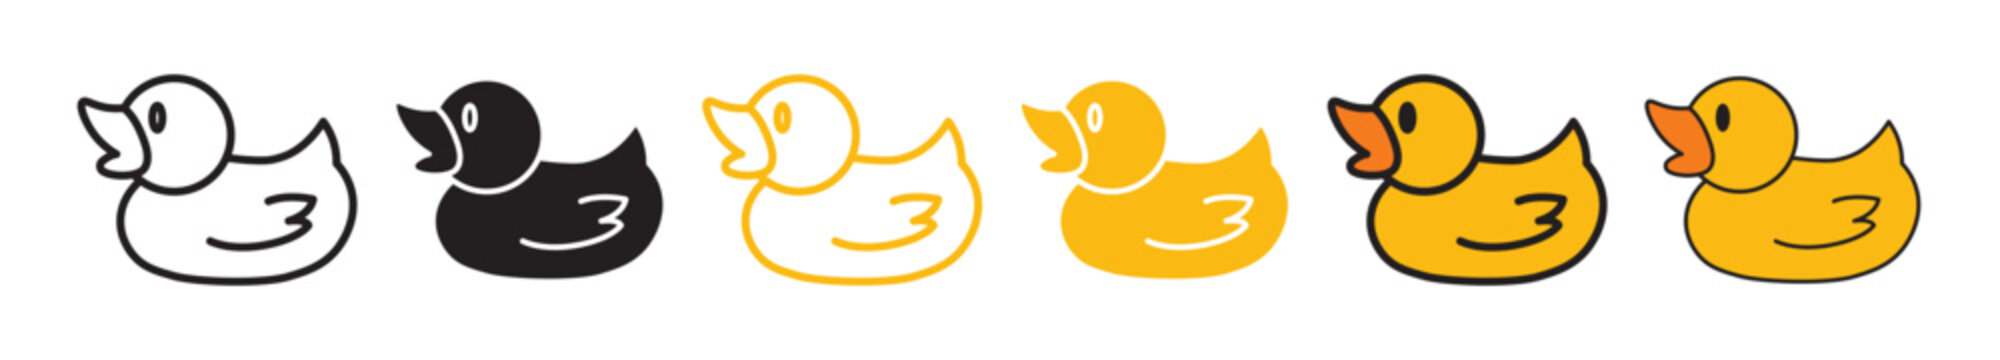 rubber duck vector icon set in black and yellow color. plastic toy duck pictogram in fill and outline style.